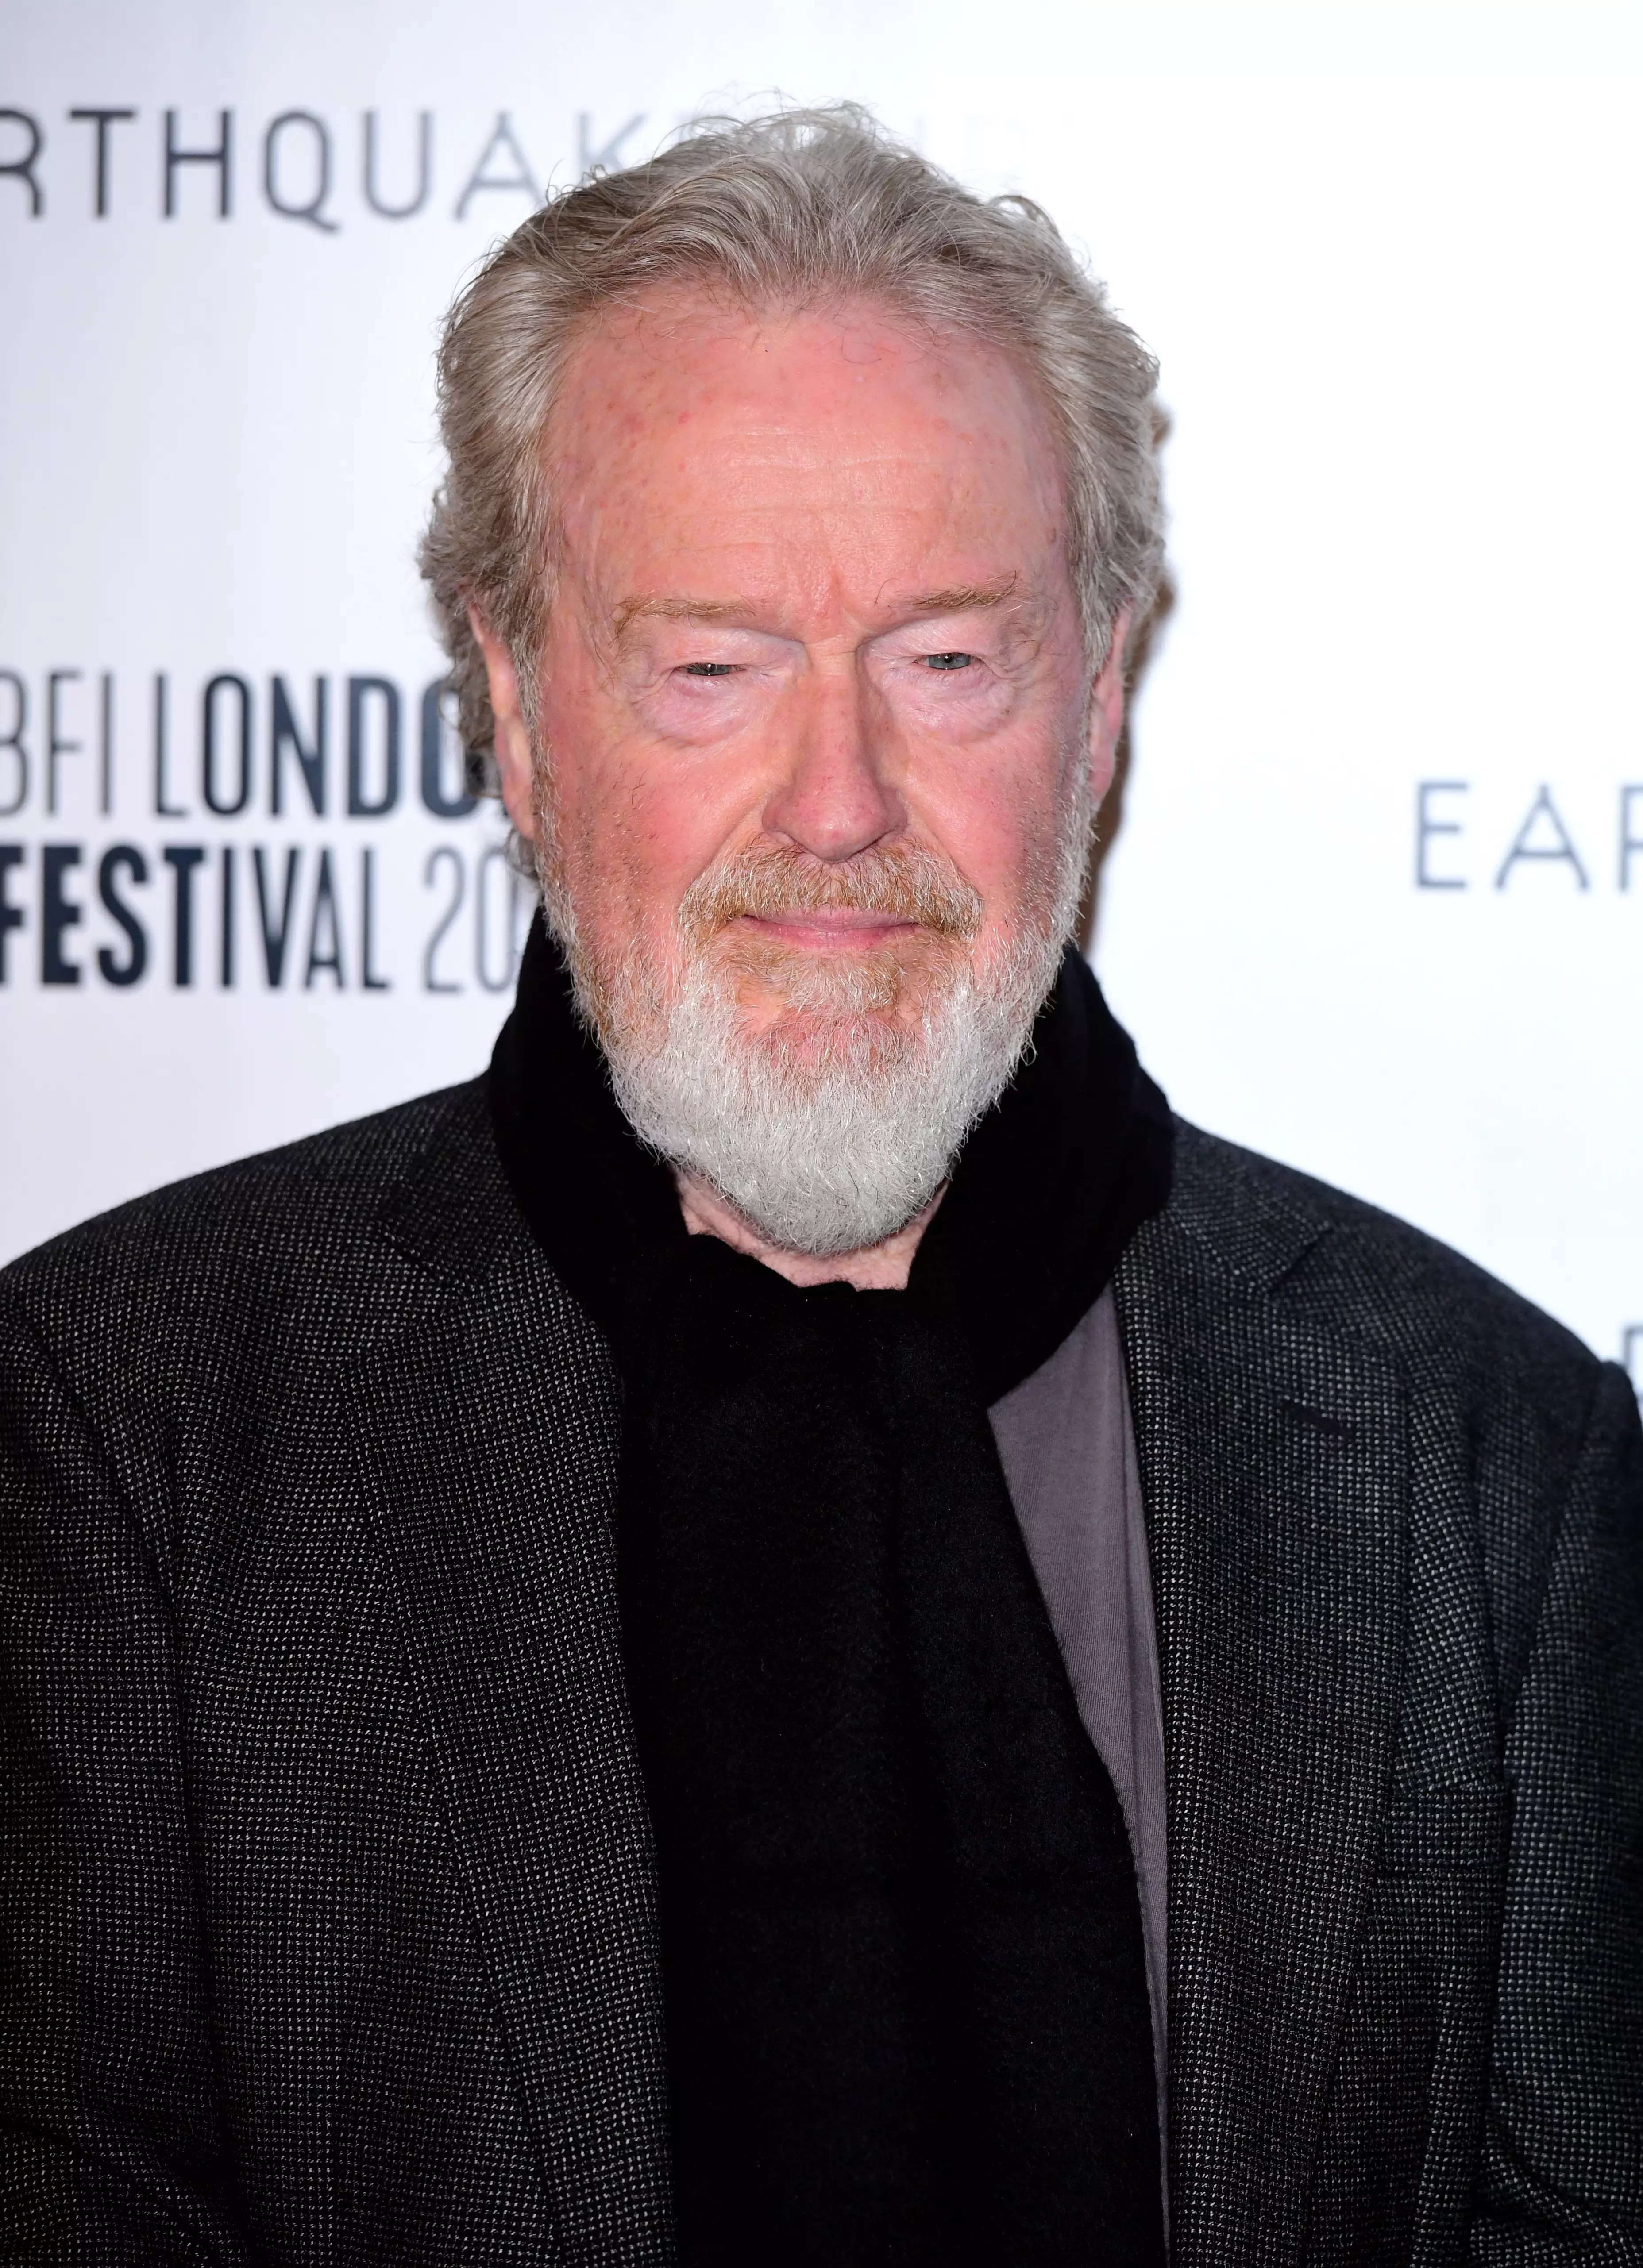 Ridley Scott's new movie will focus on the dictator's relationship with Josephine.